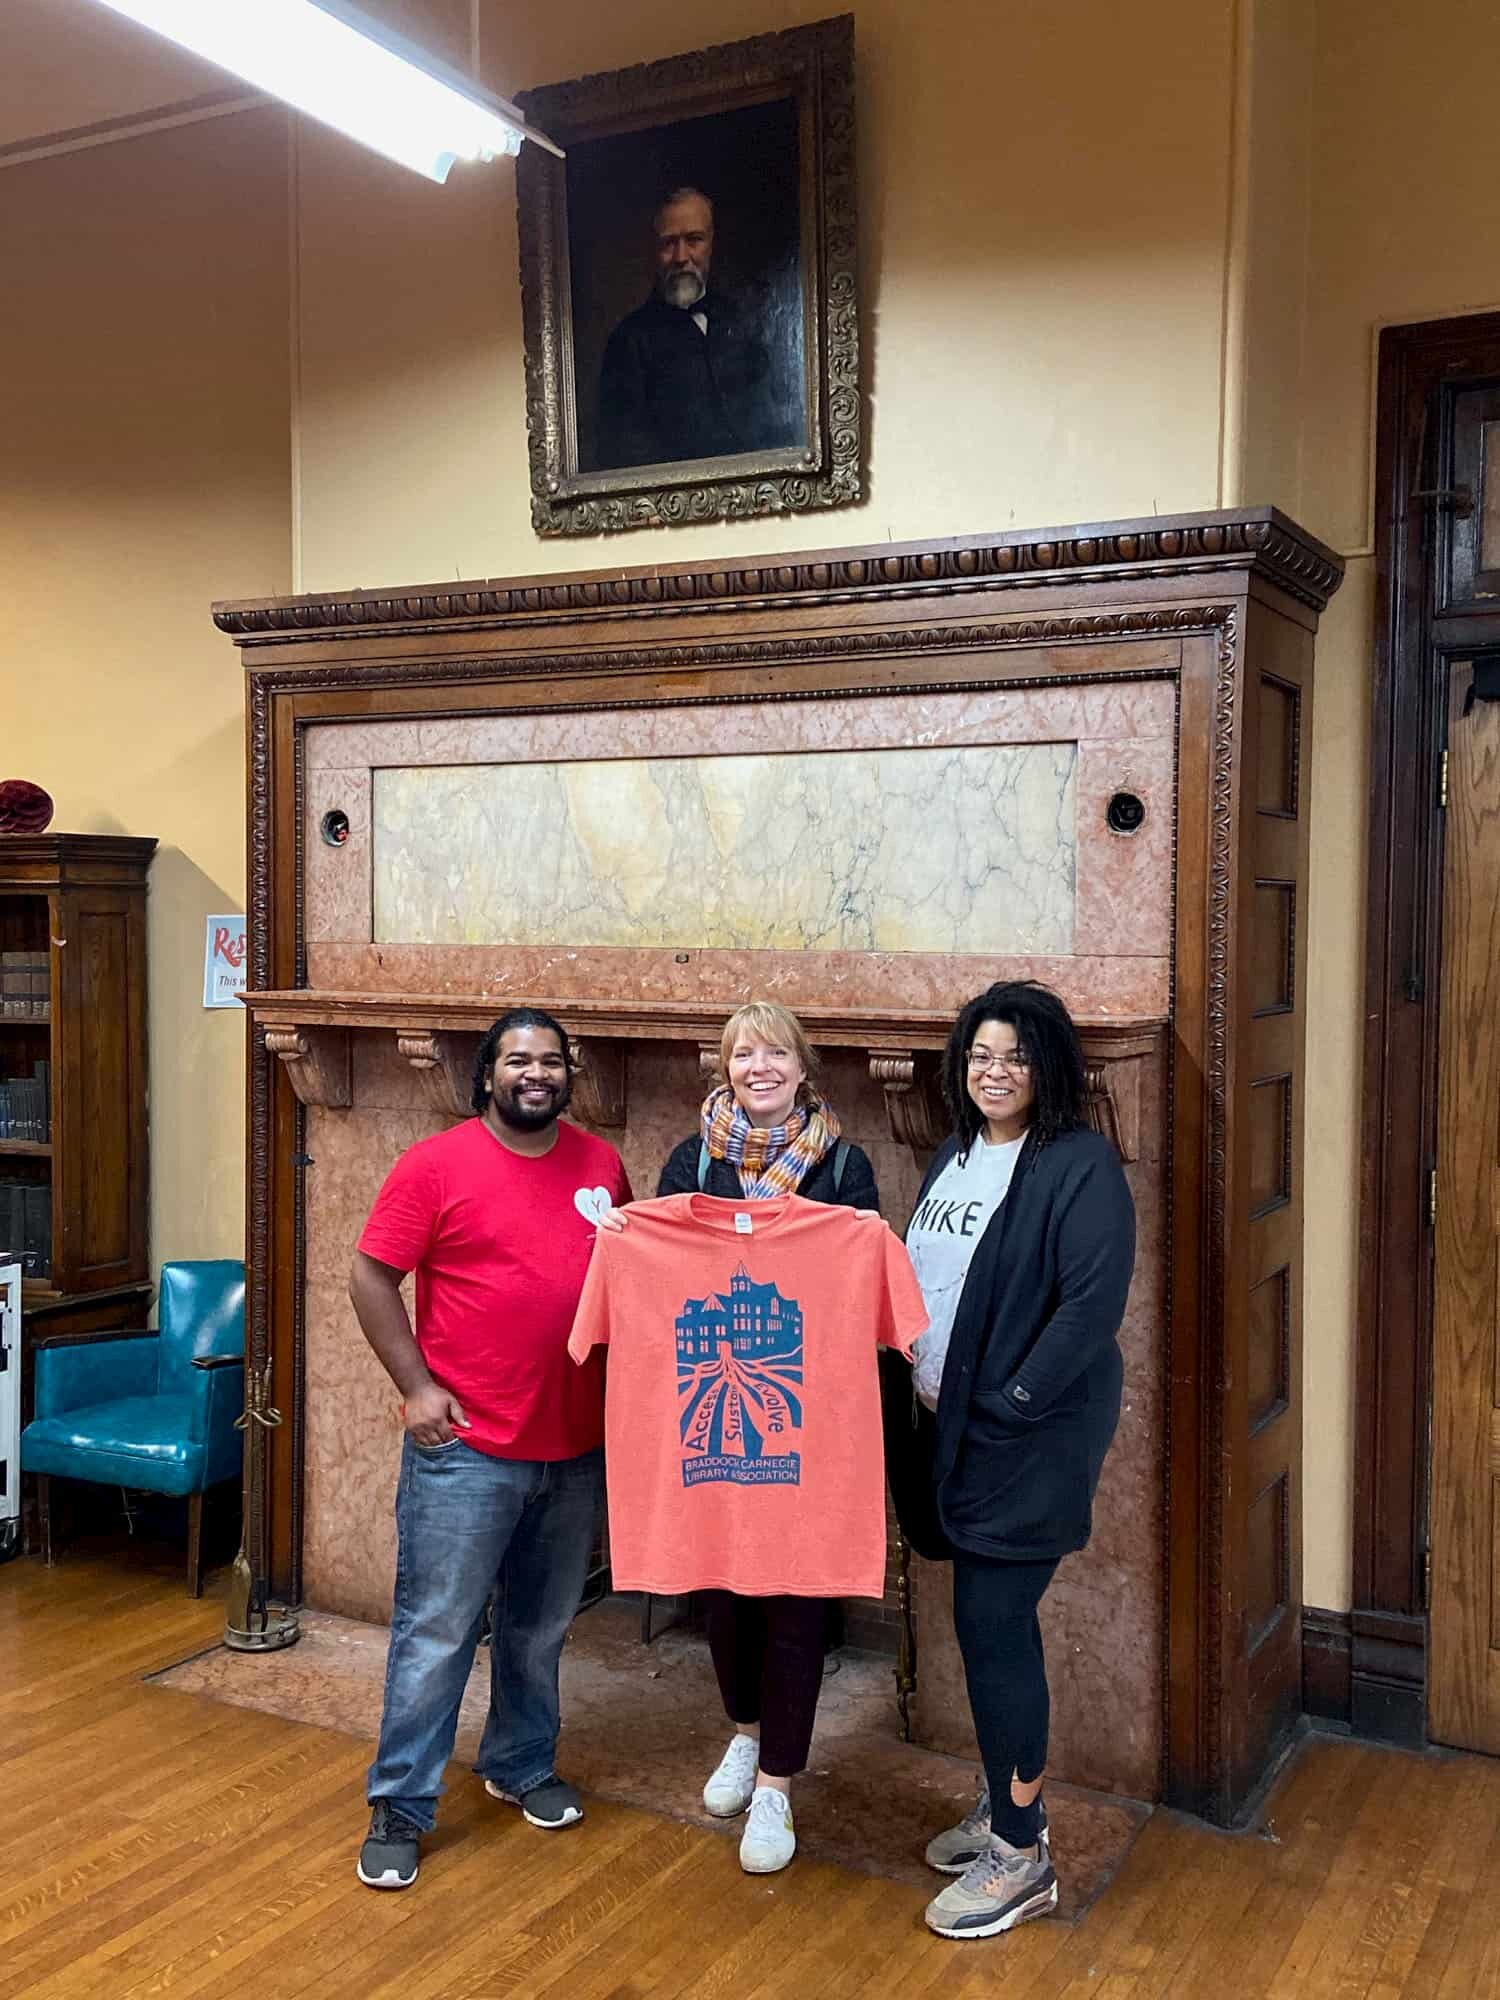  Our Curator with two members of the Braddock library staff, standing under the watchful eye of Andrew Carnegie. 